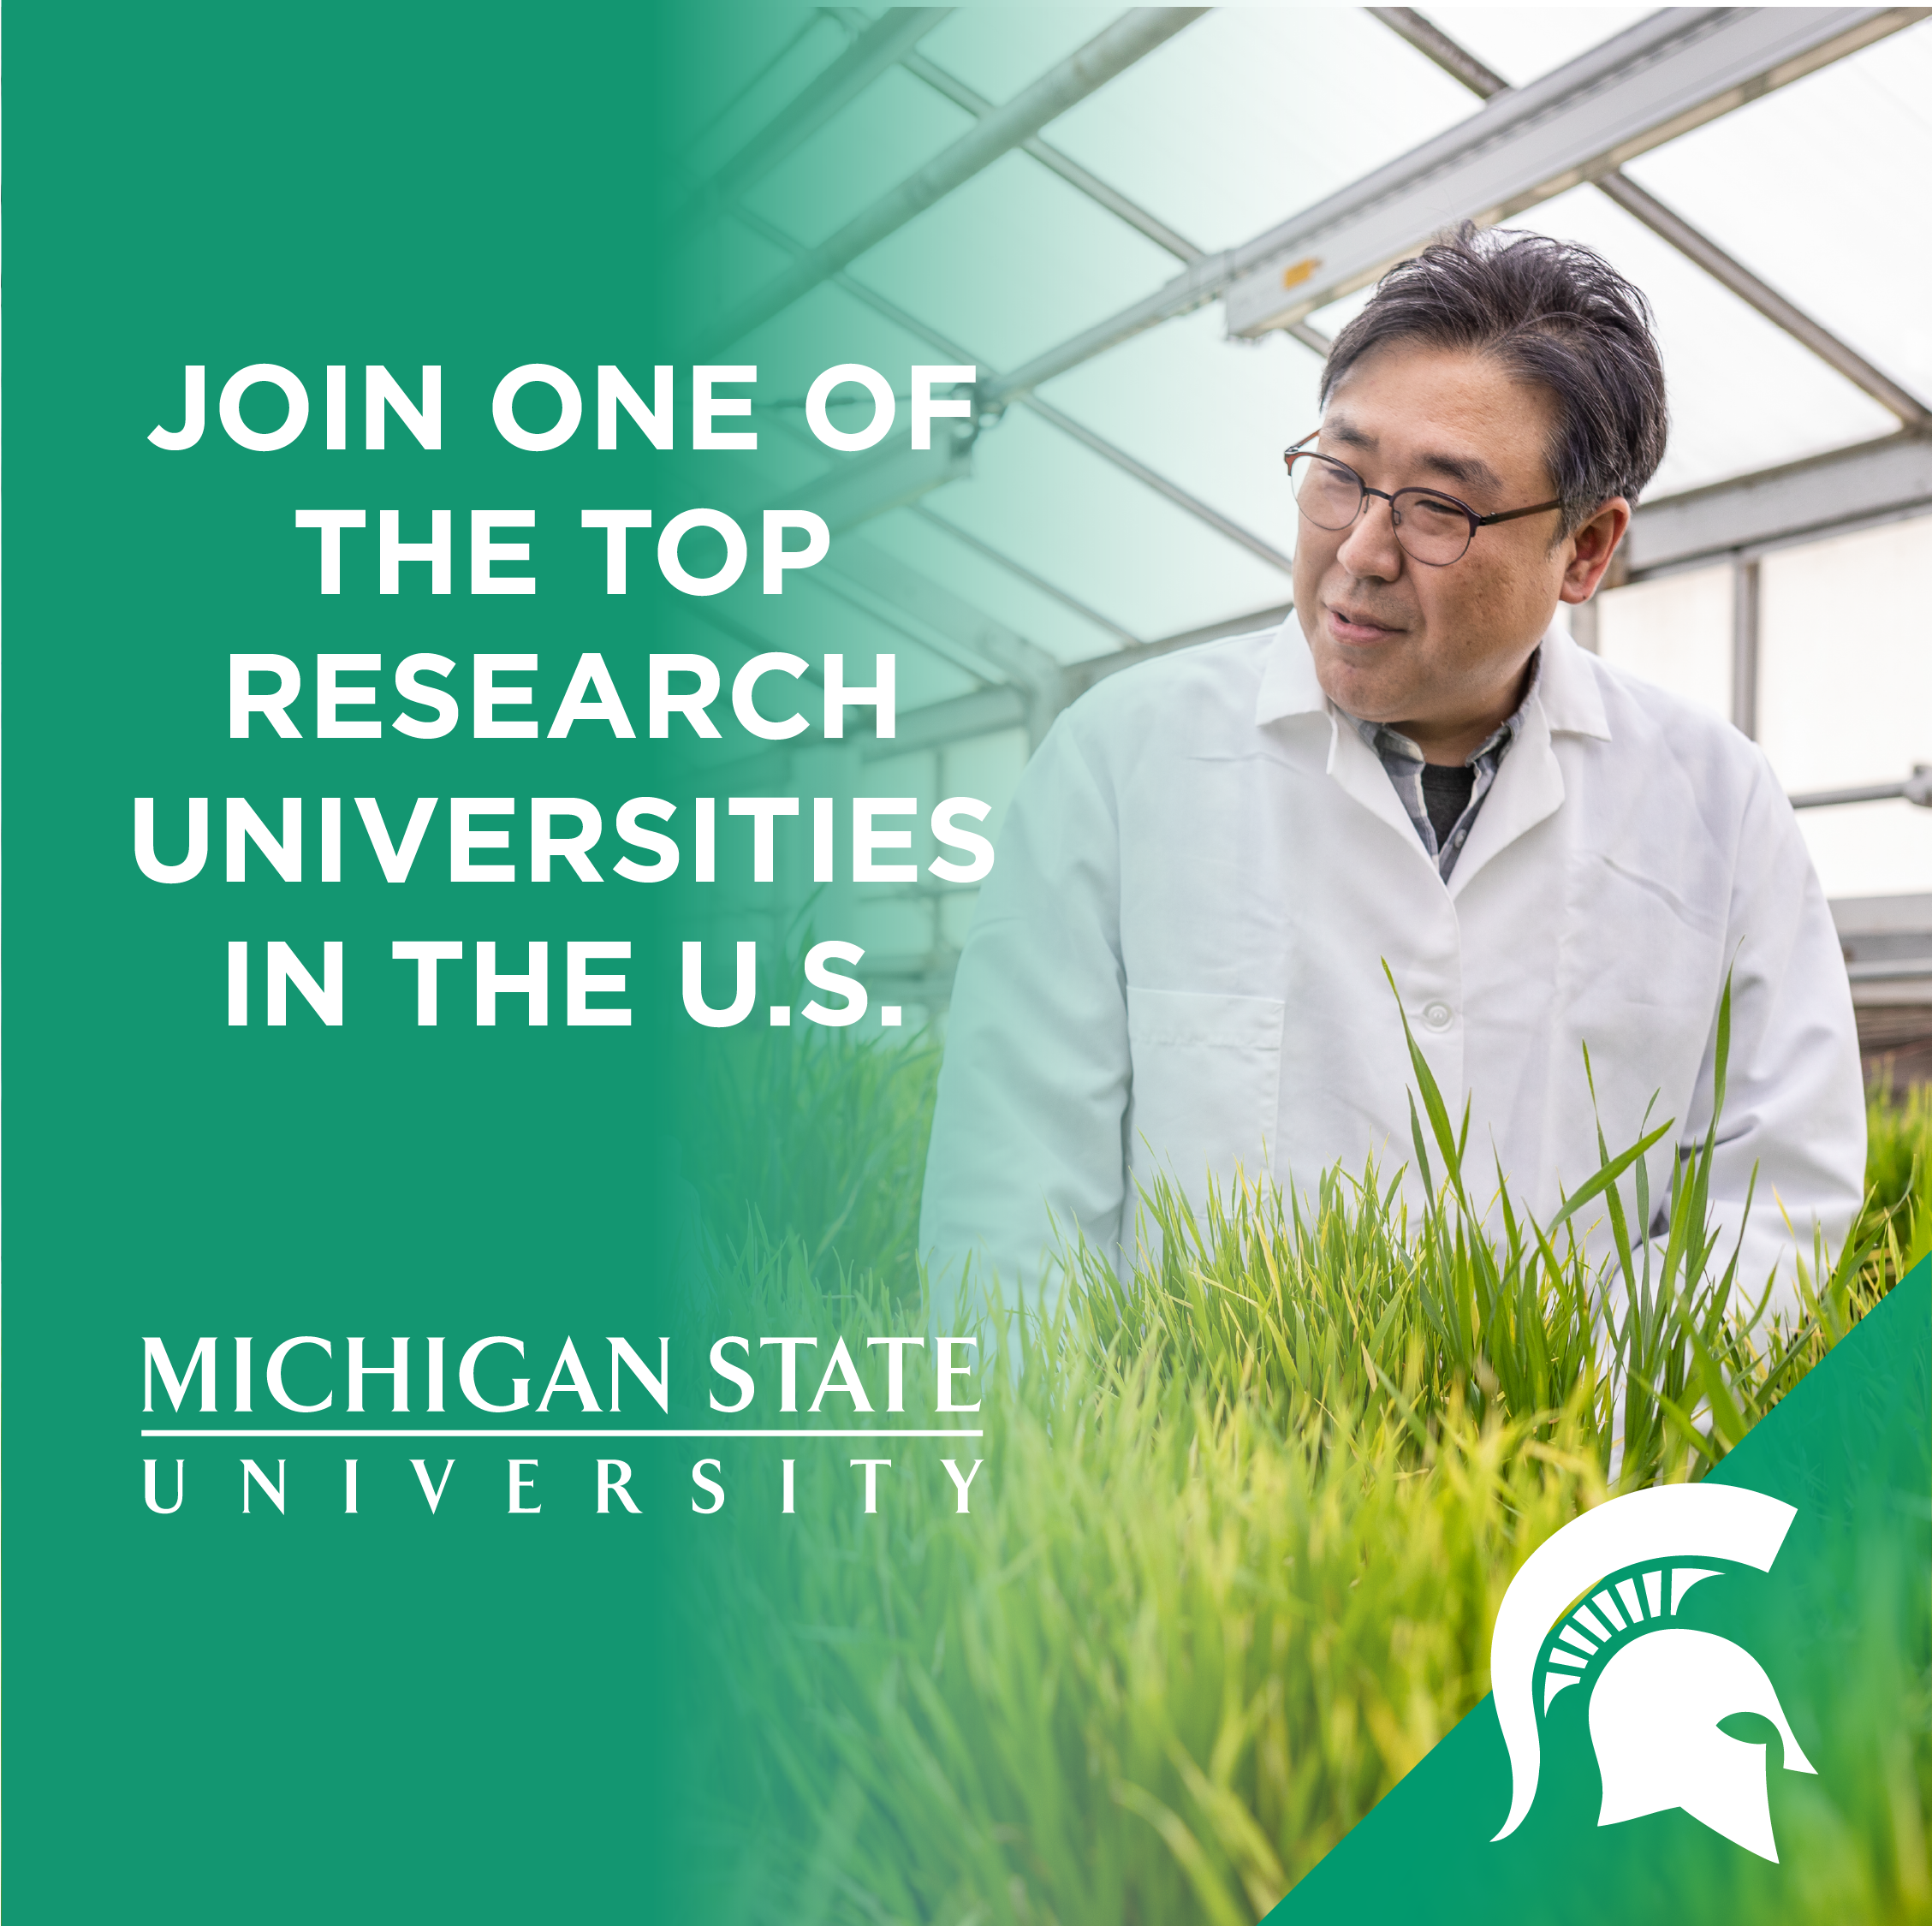 Join a world-renowned plant science research program with a history of groundbreaking discoveries.